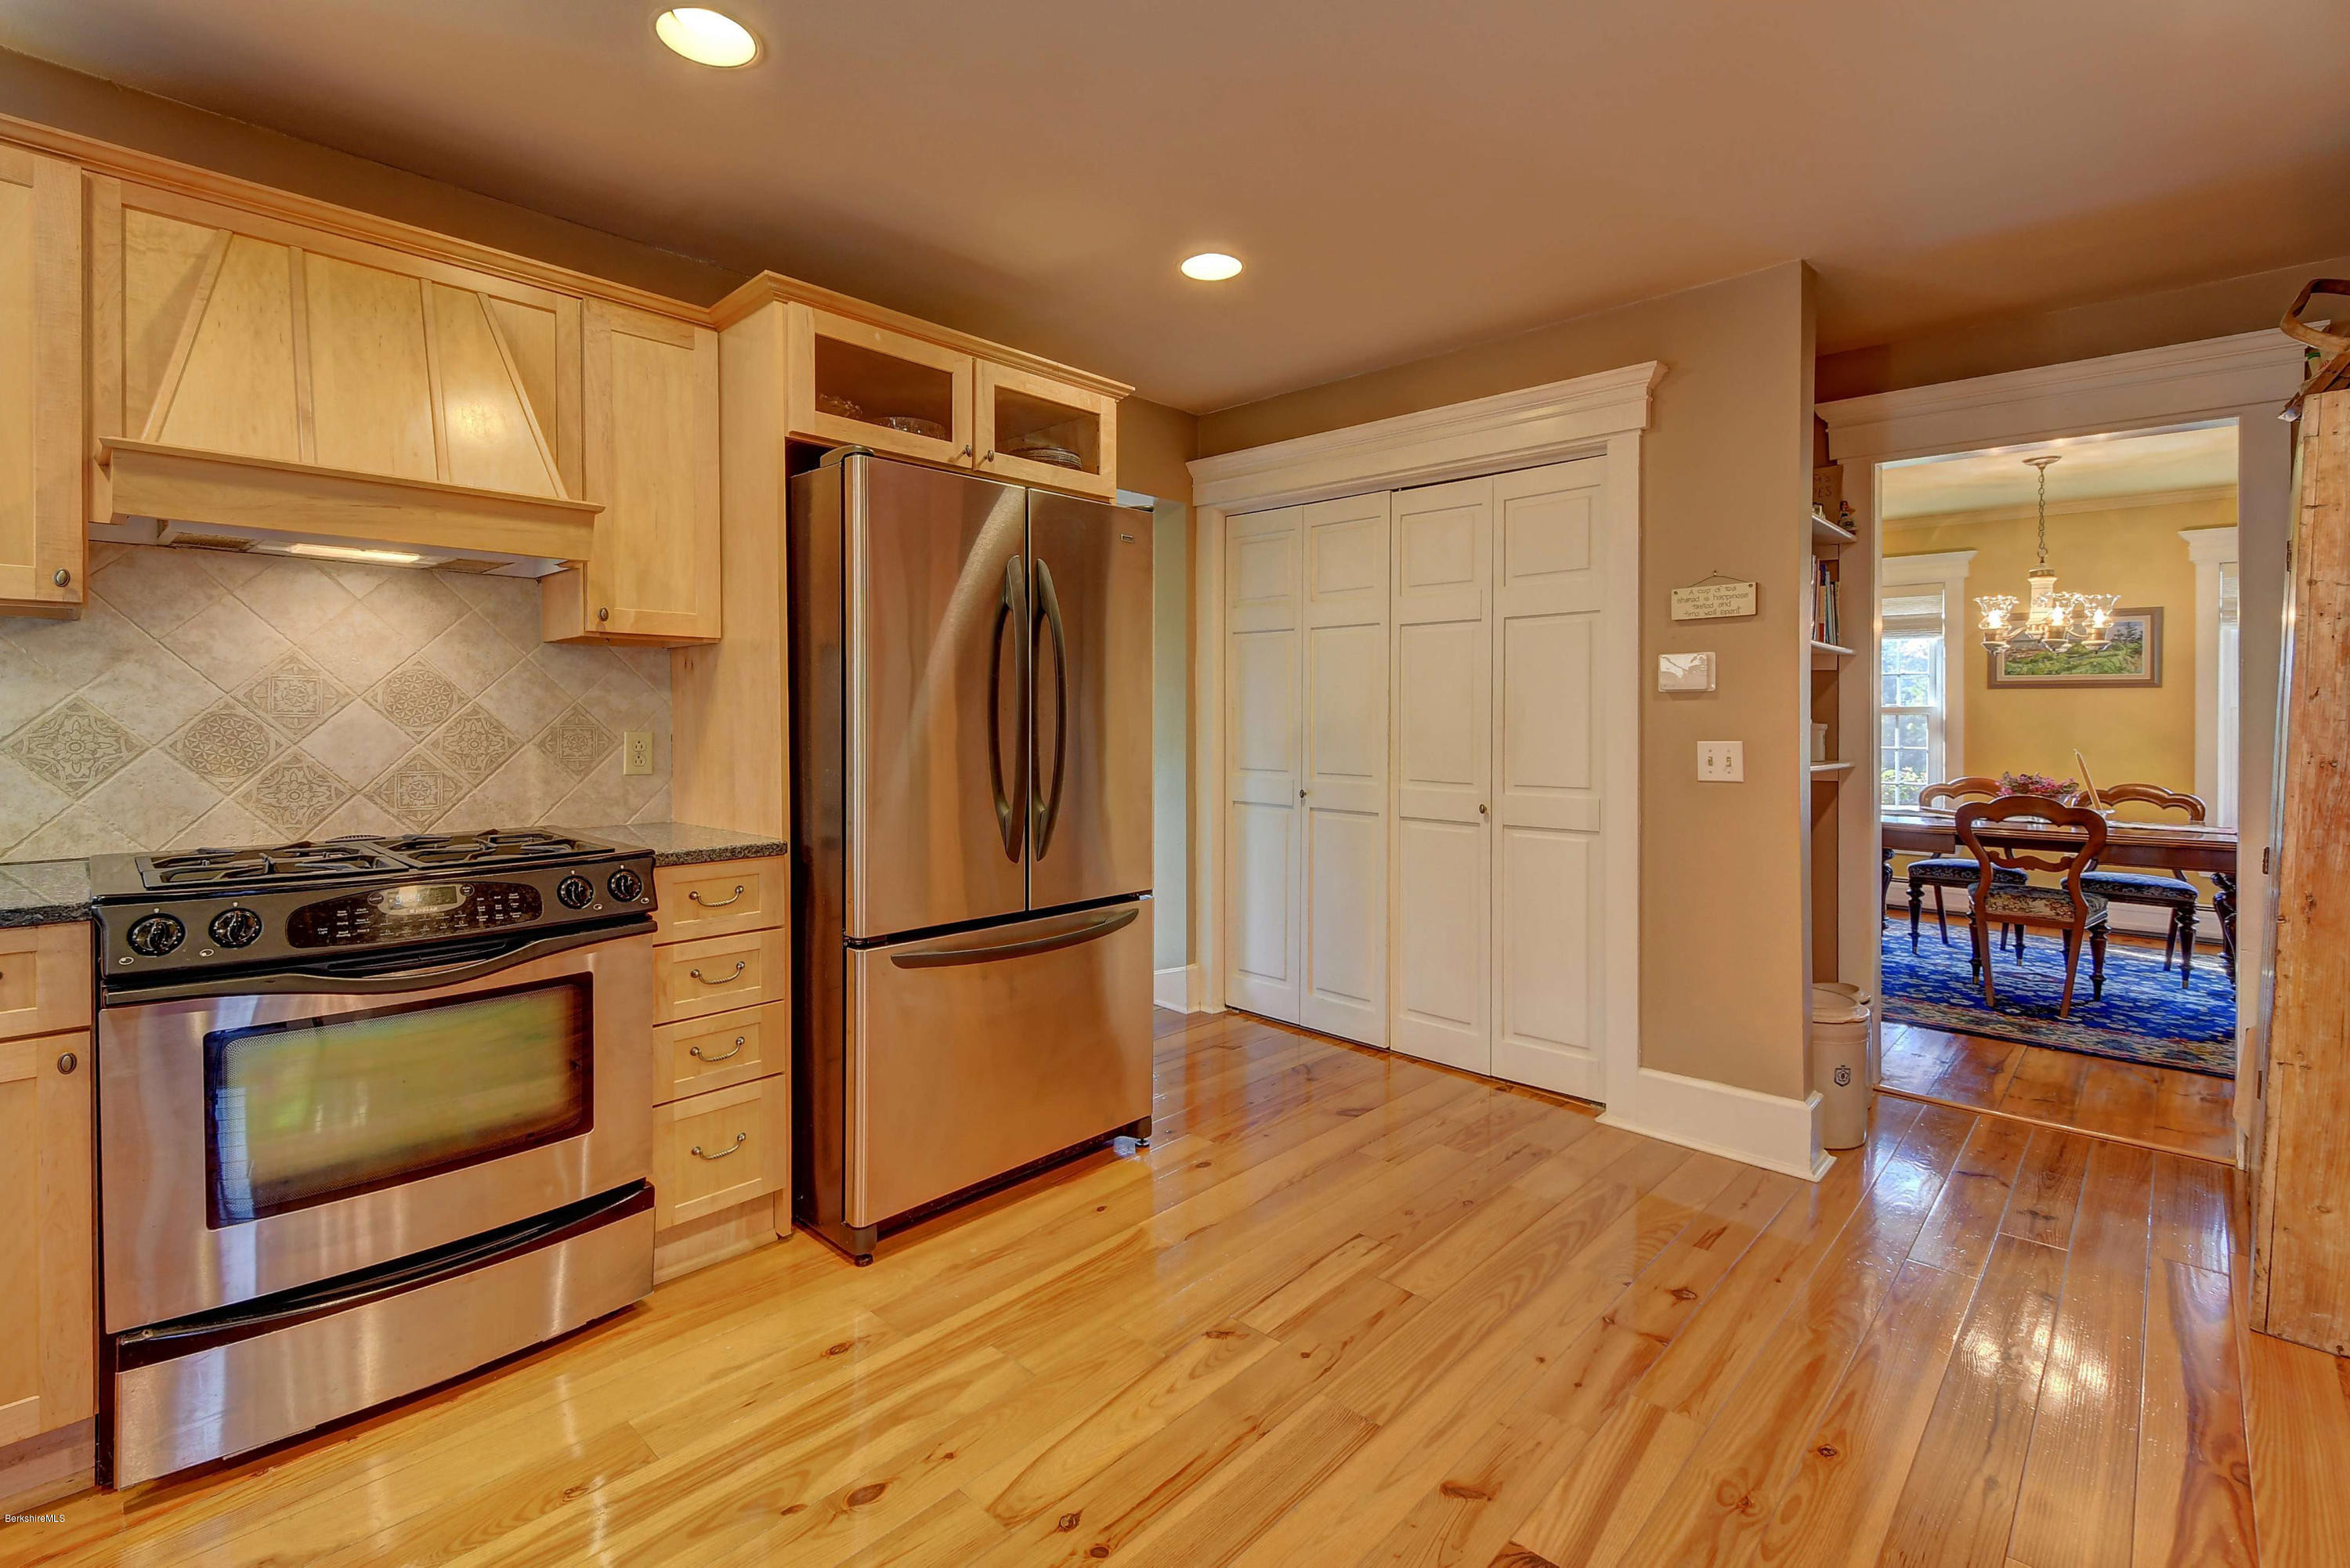 23 attractive Hardwood Flooring Inc Elmsford Ny 2024 free download hardwood flooring inc elmsford ny of 154 division st great barrington 01230 stone house properties llc for 154 division st great barrington ma 01230